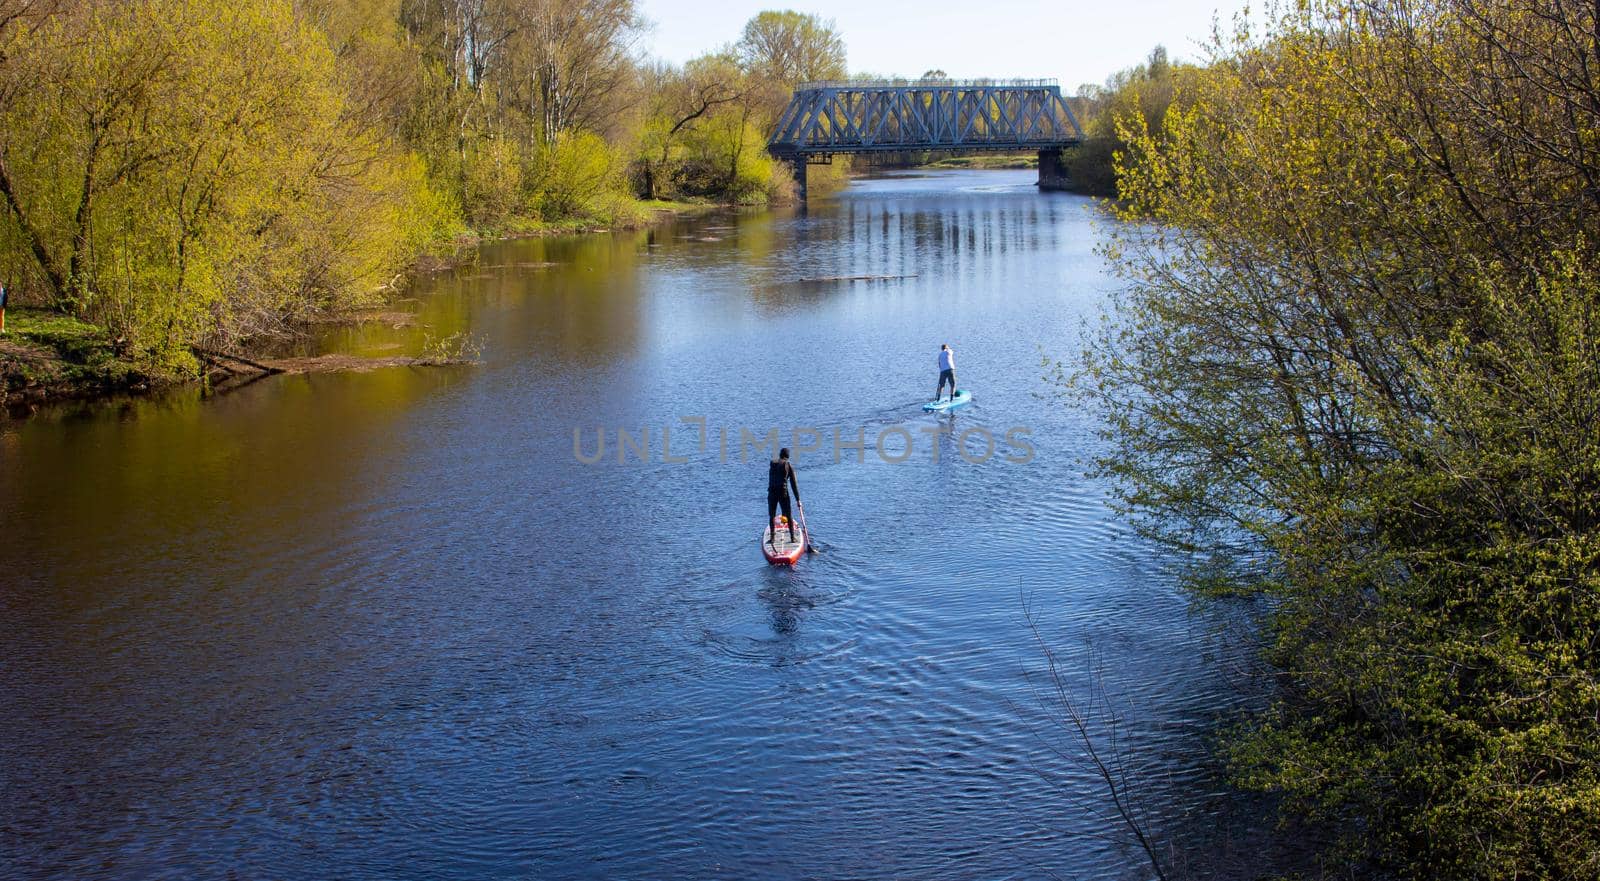 Two men are swimming on a paddleboard on the spring river.I can't see his face